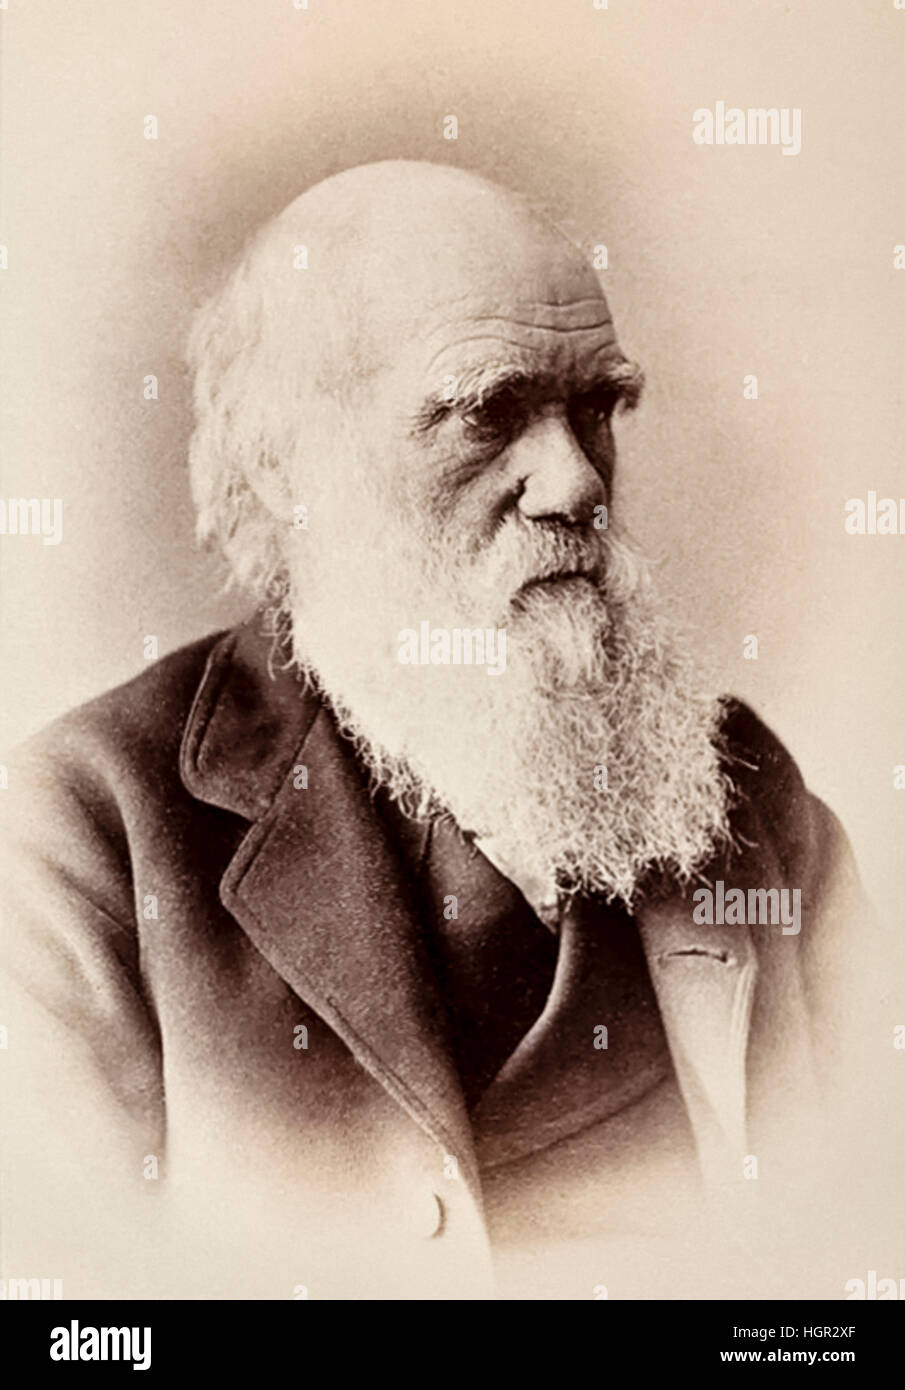 Charles Darwin (1809-1882) English naturalist who first set out his theory of evolution and natural selection in his book 'On the Origin of Species' published in 1859. Photograph taken in 1881, the year the Natural History Museum opened in London. See description for more information. Stock Photo